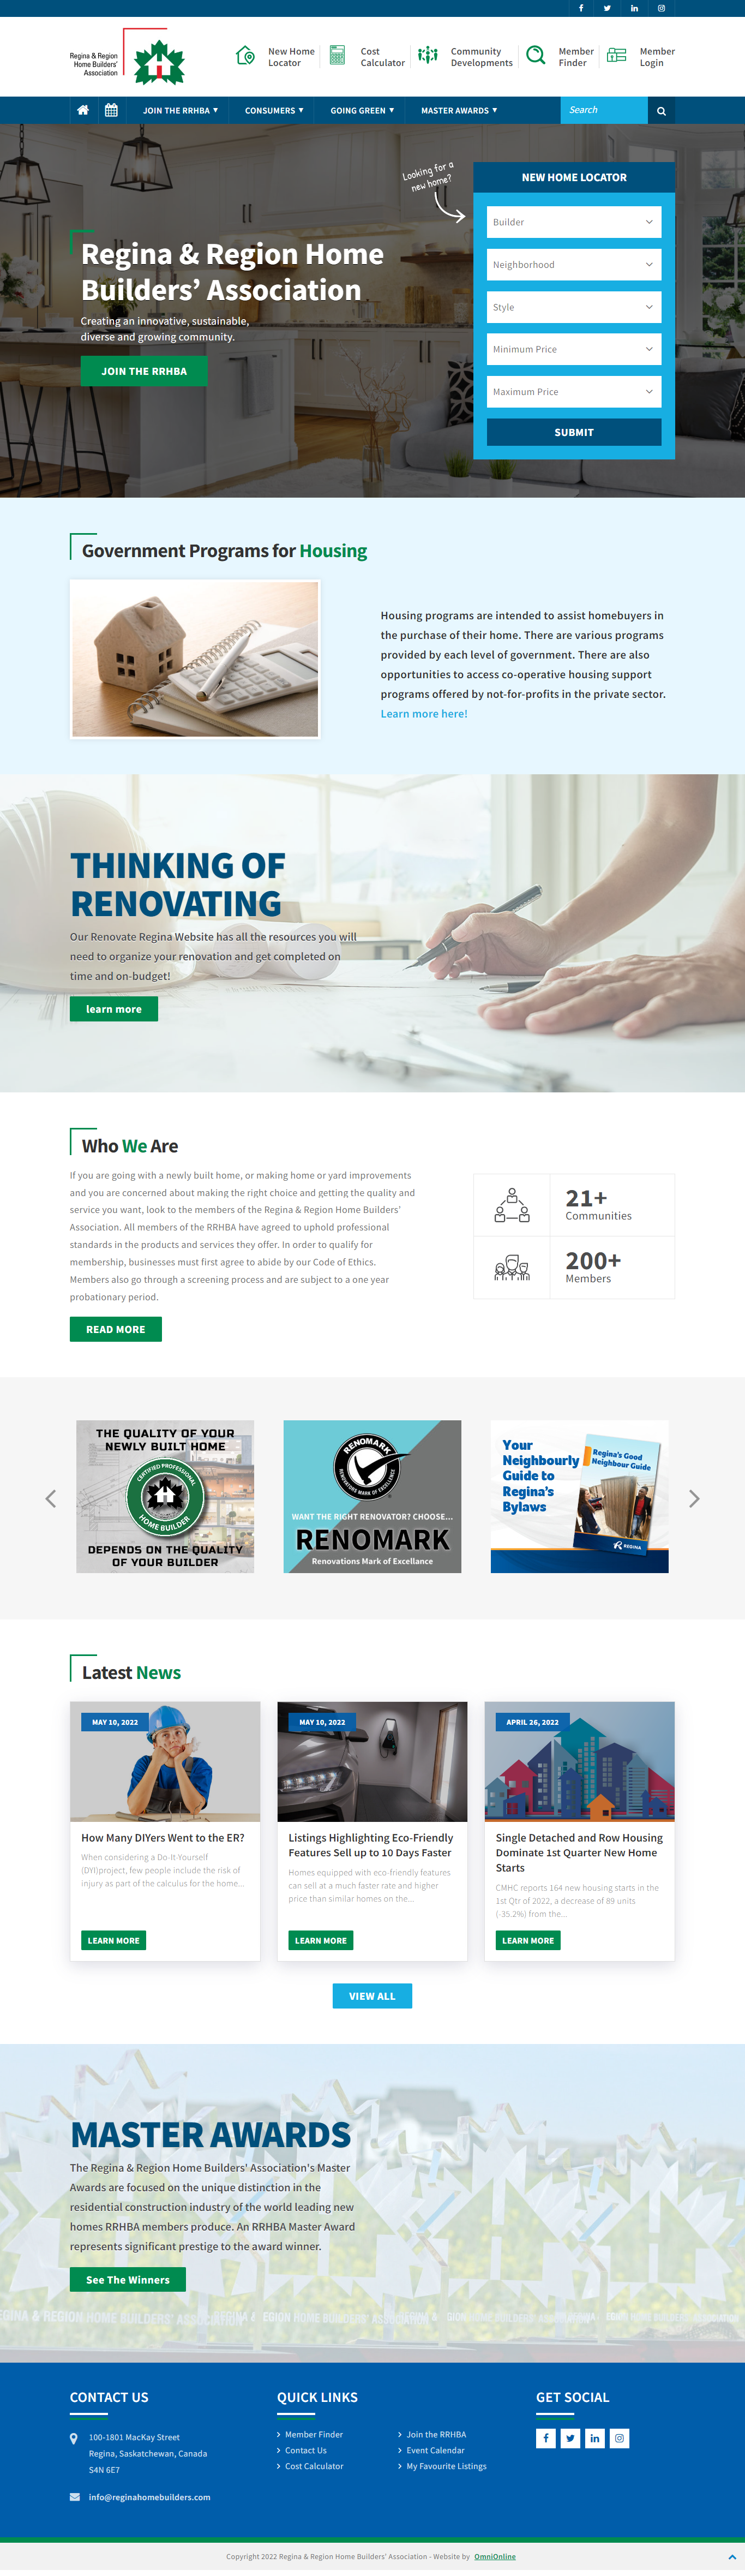 RRHBA website - designed and developed by OmniOnline